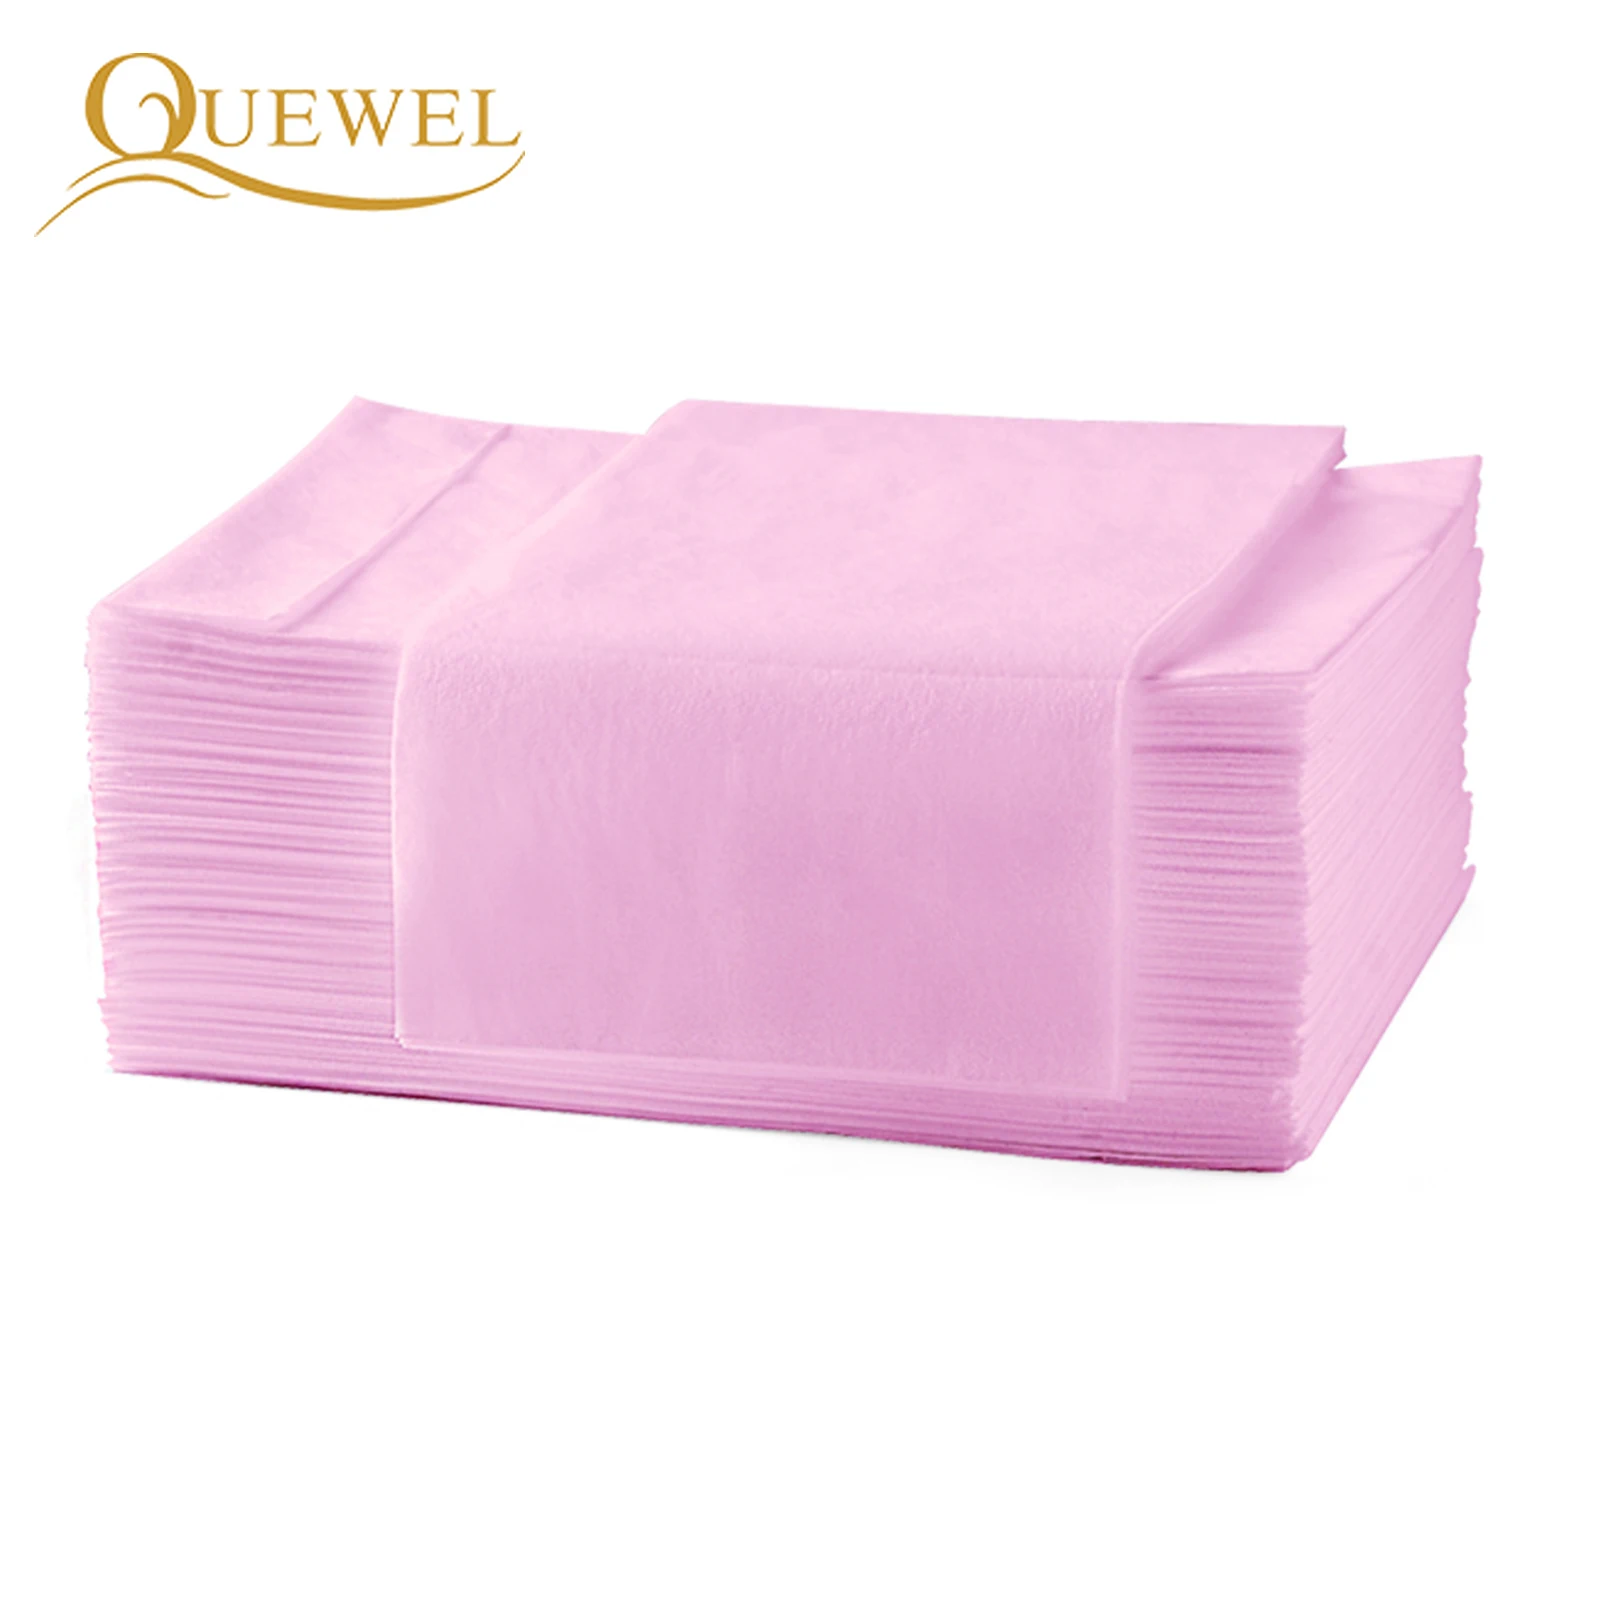 Quewel Disposable Bed Sheets 10Pcs 80x180cm Thicken Non-woven Fabric Eyelash Extensions Beauty Salon Waterproof Bed Table Cover images - 6